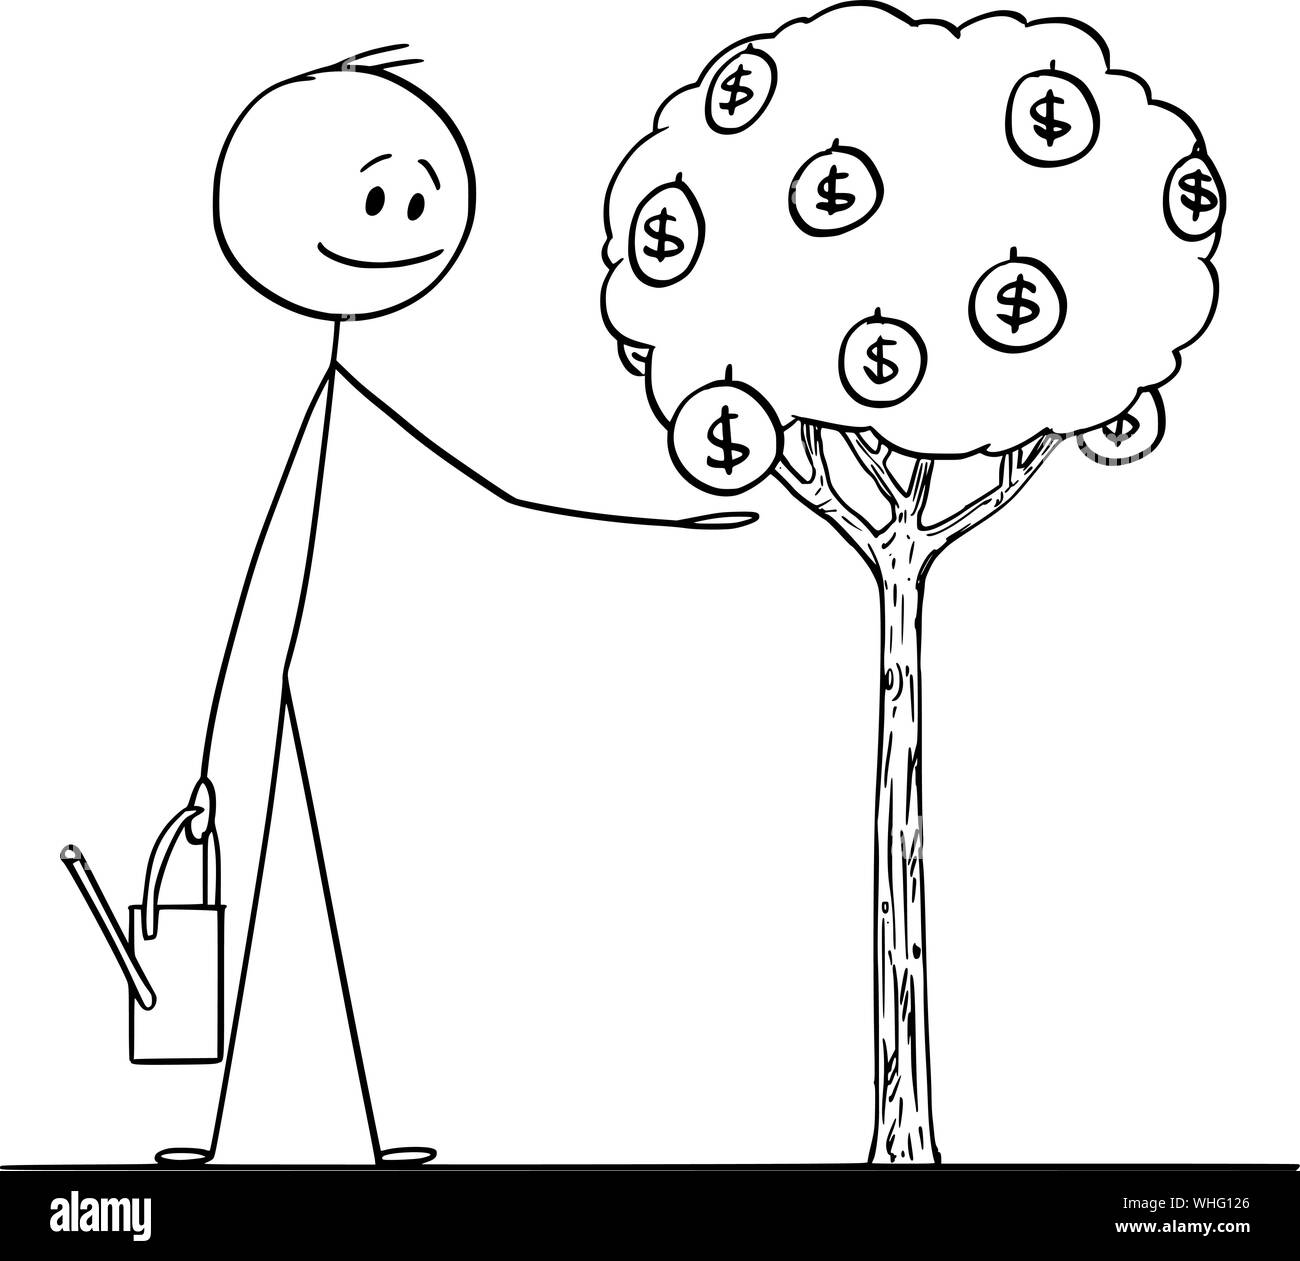 Stick Figure Tree High Resolution Stock Photography and Images - Alamy